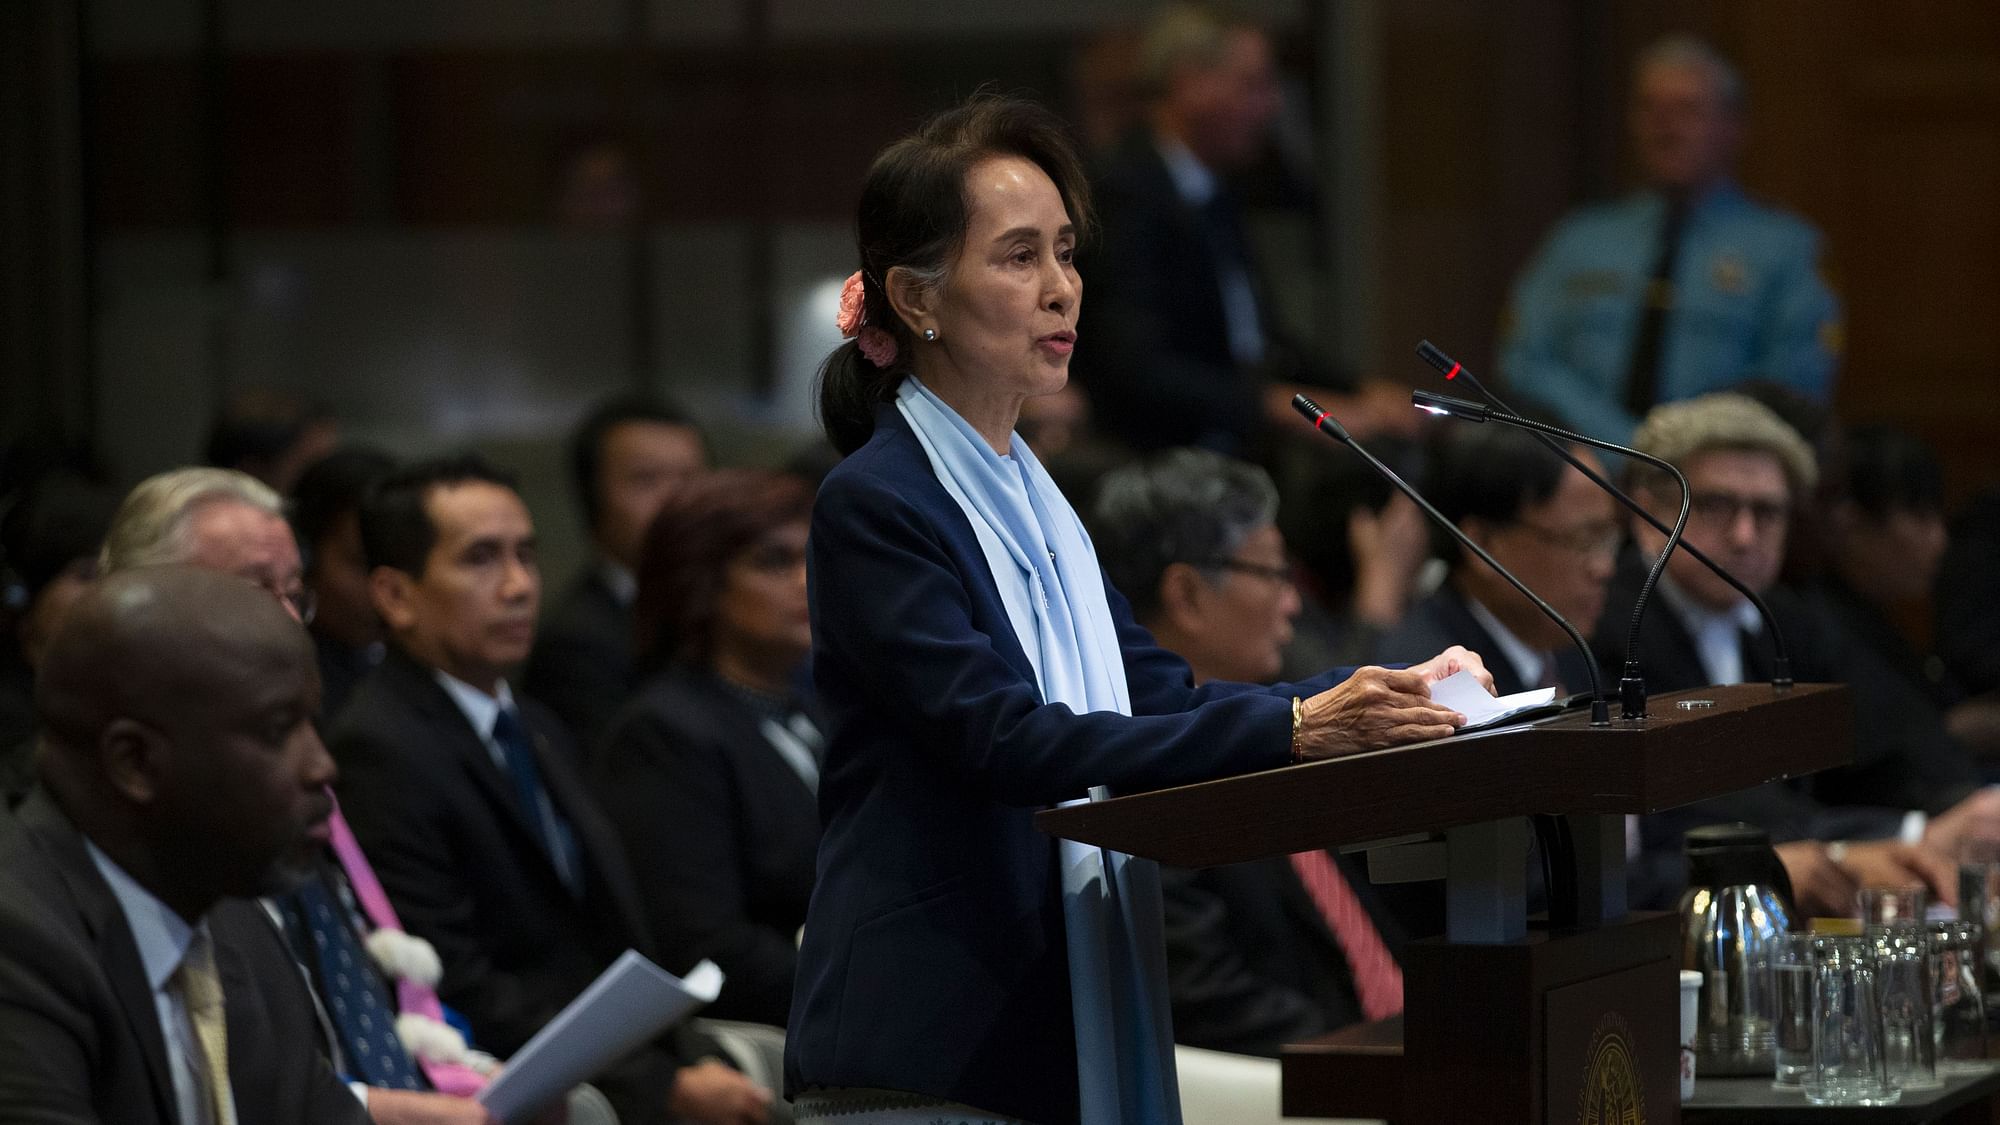 Myanmar’s leader Aung San Suu Kyi addresses judges of the International Court of Justice for the second day of three days of hearings in The Hague, Netherlands, Wednesday, 11December.